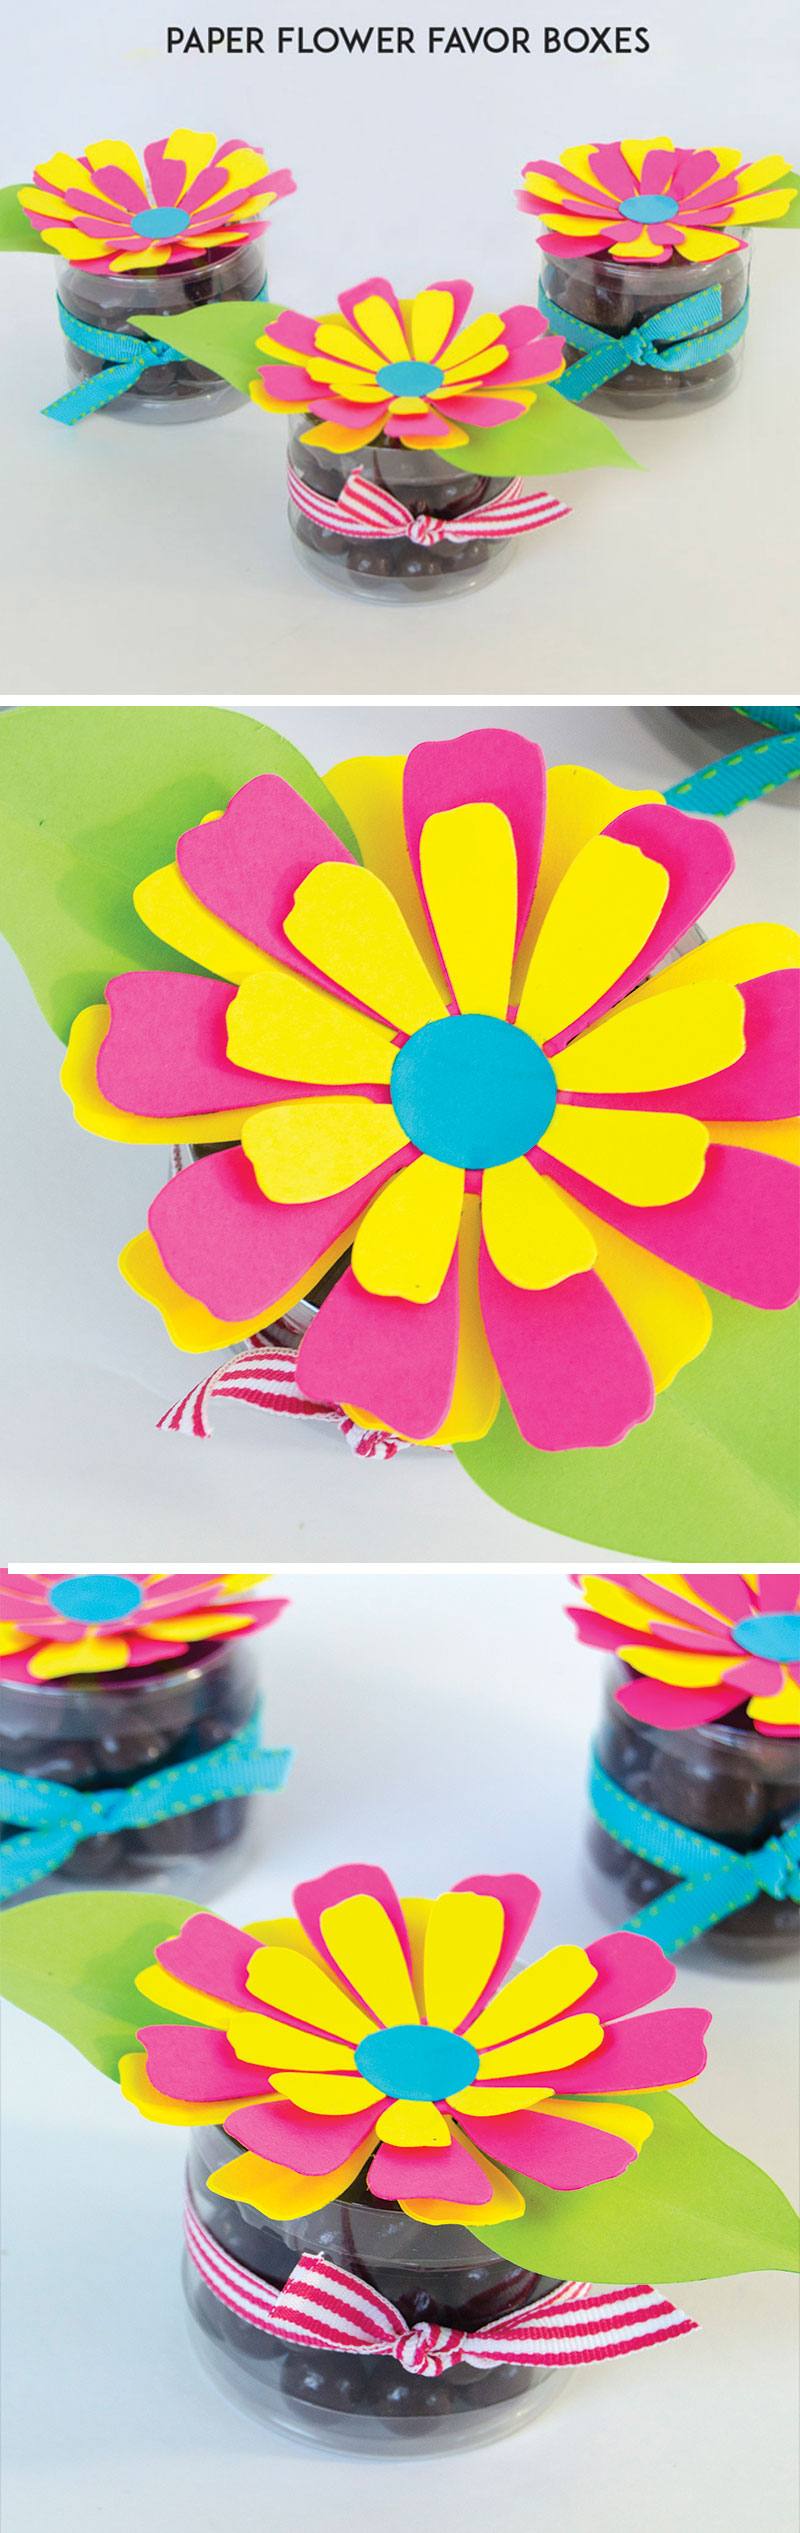 Paper Flower Favor Box Tutorial & MY FIRST VIDEO by Lindi Haws of Love The Day